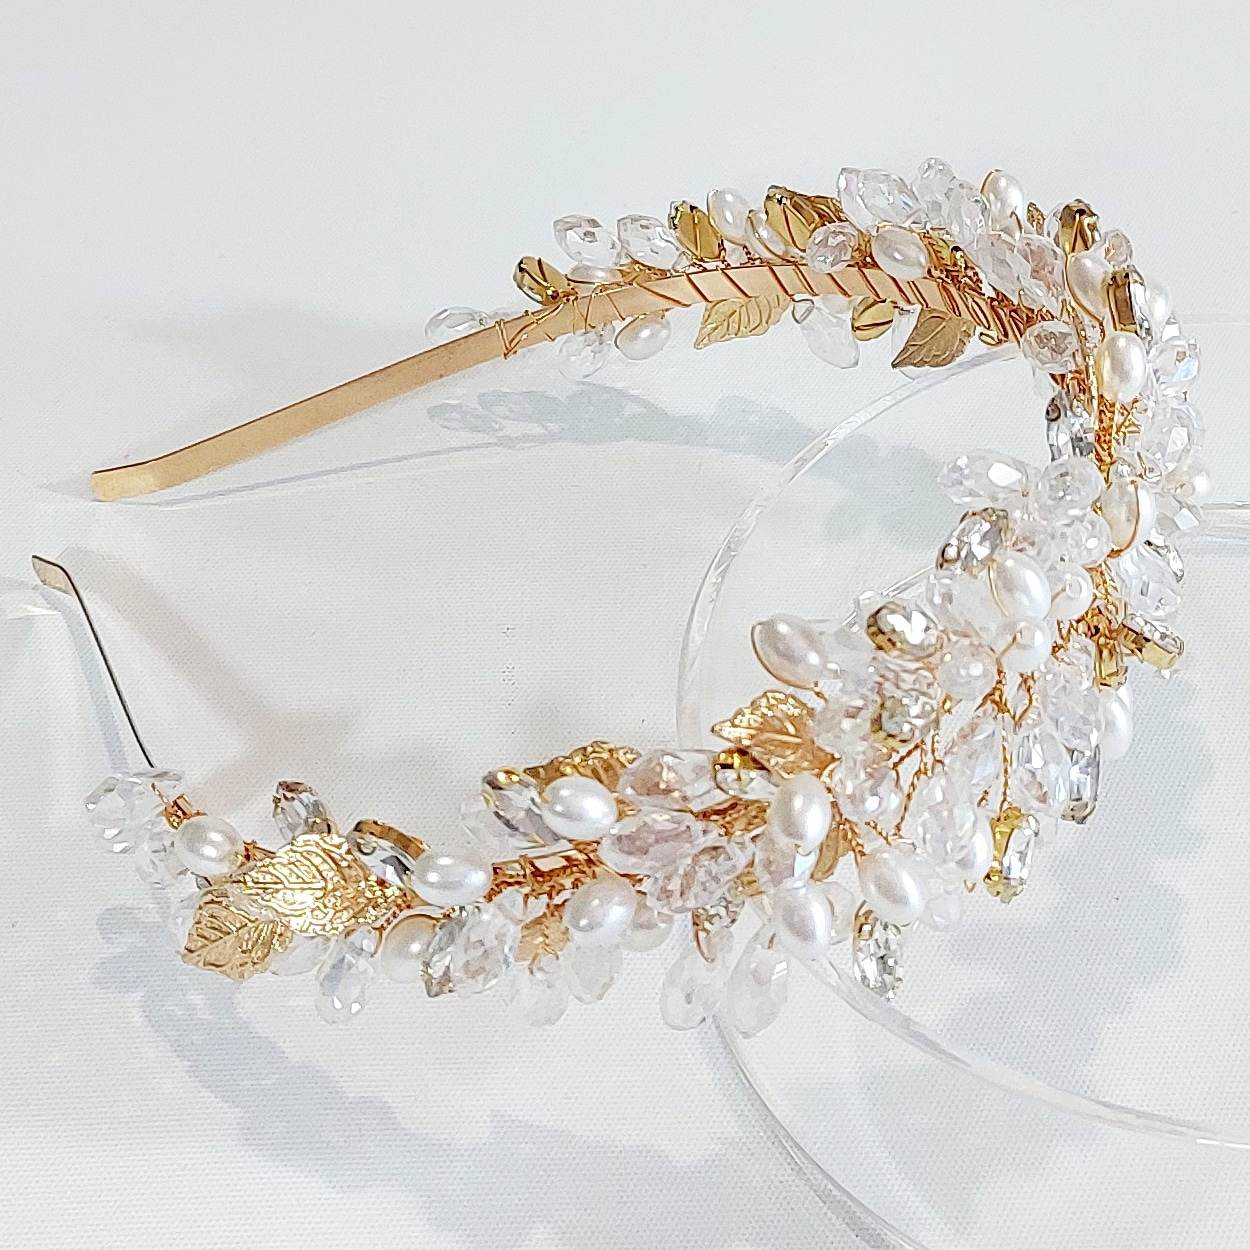 stunning vintage styled crystal headpiece for the races or weddings